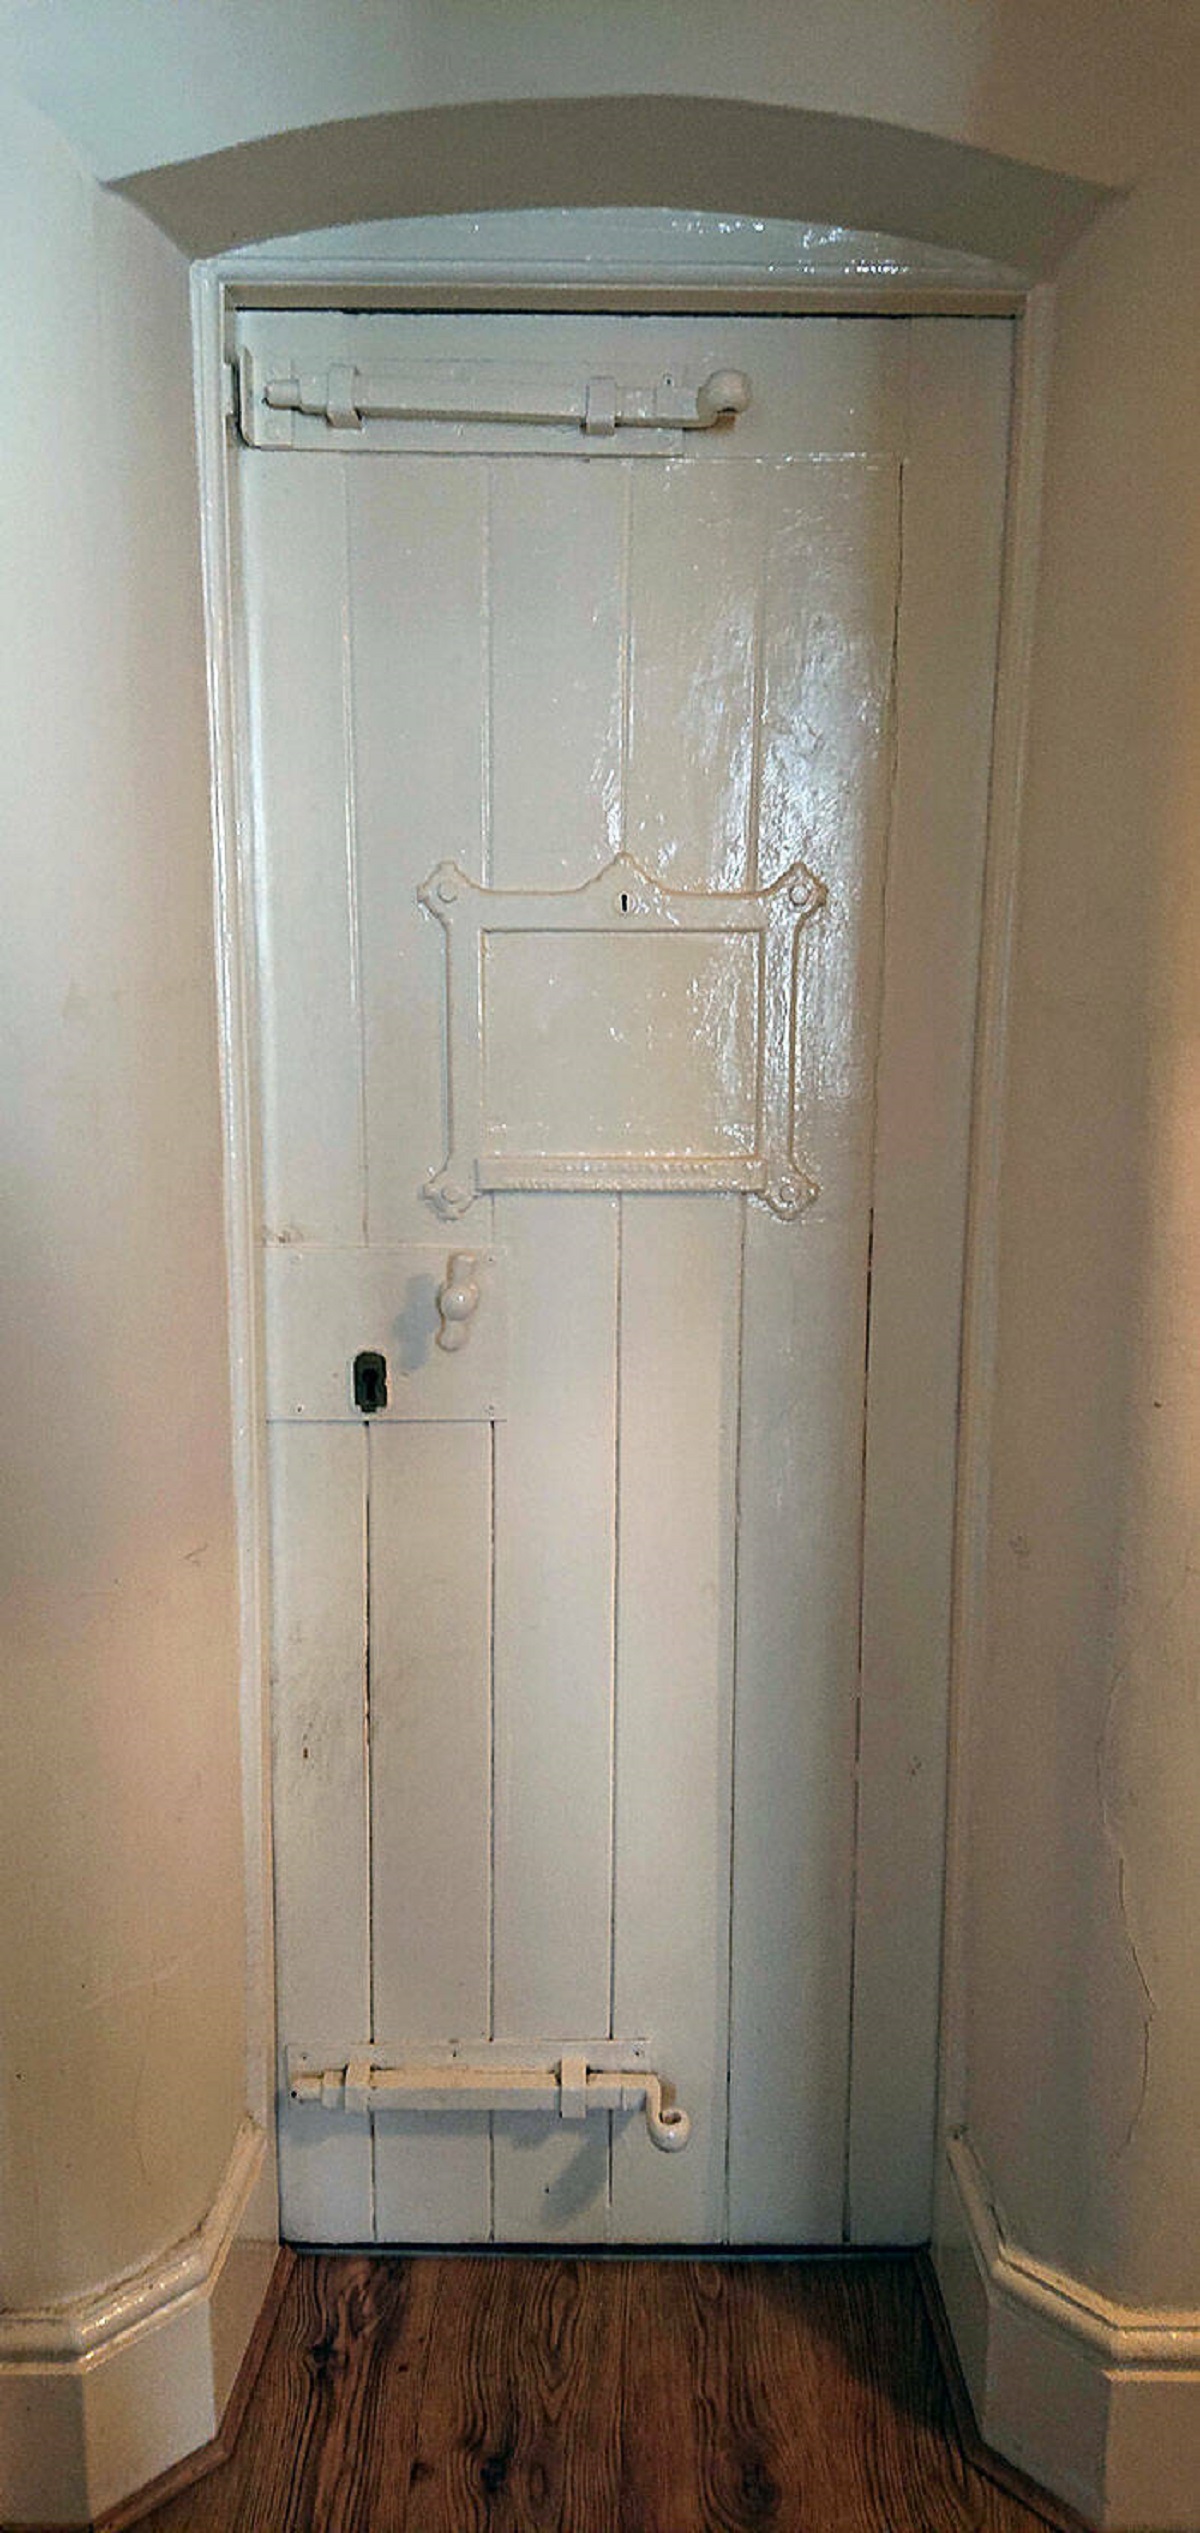 "My Apartment Is An Old Police Station And Still Has The Original Cell Doors But Painted"